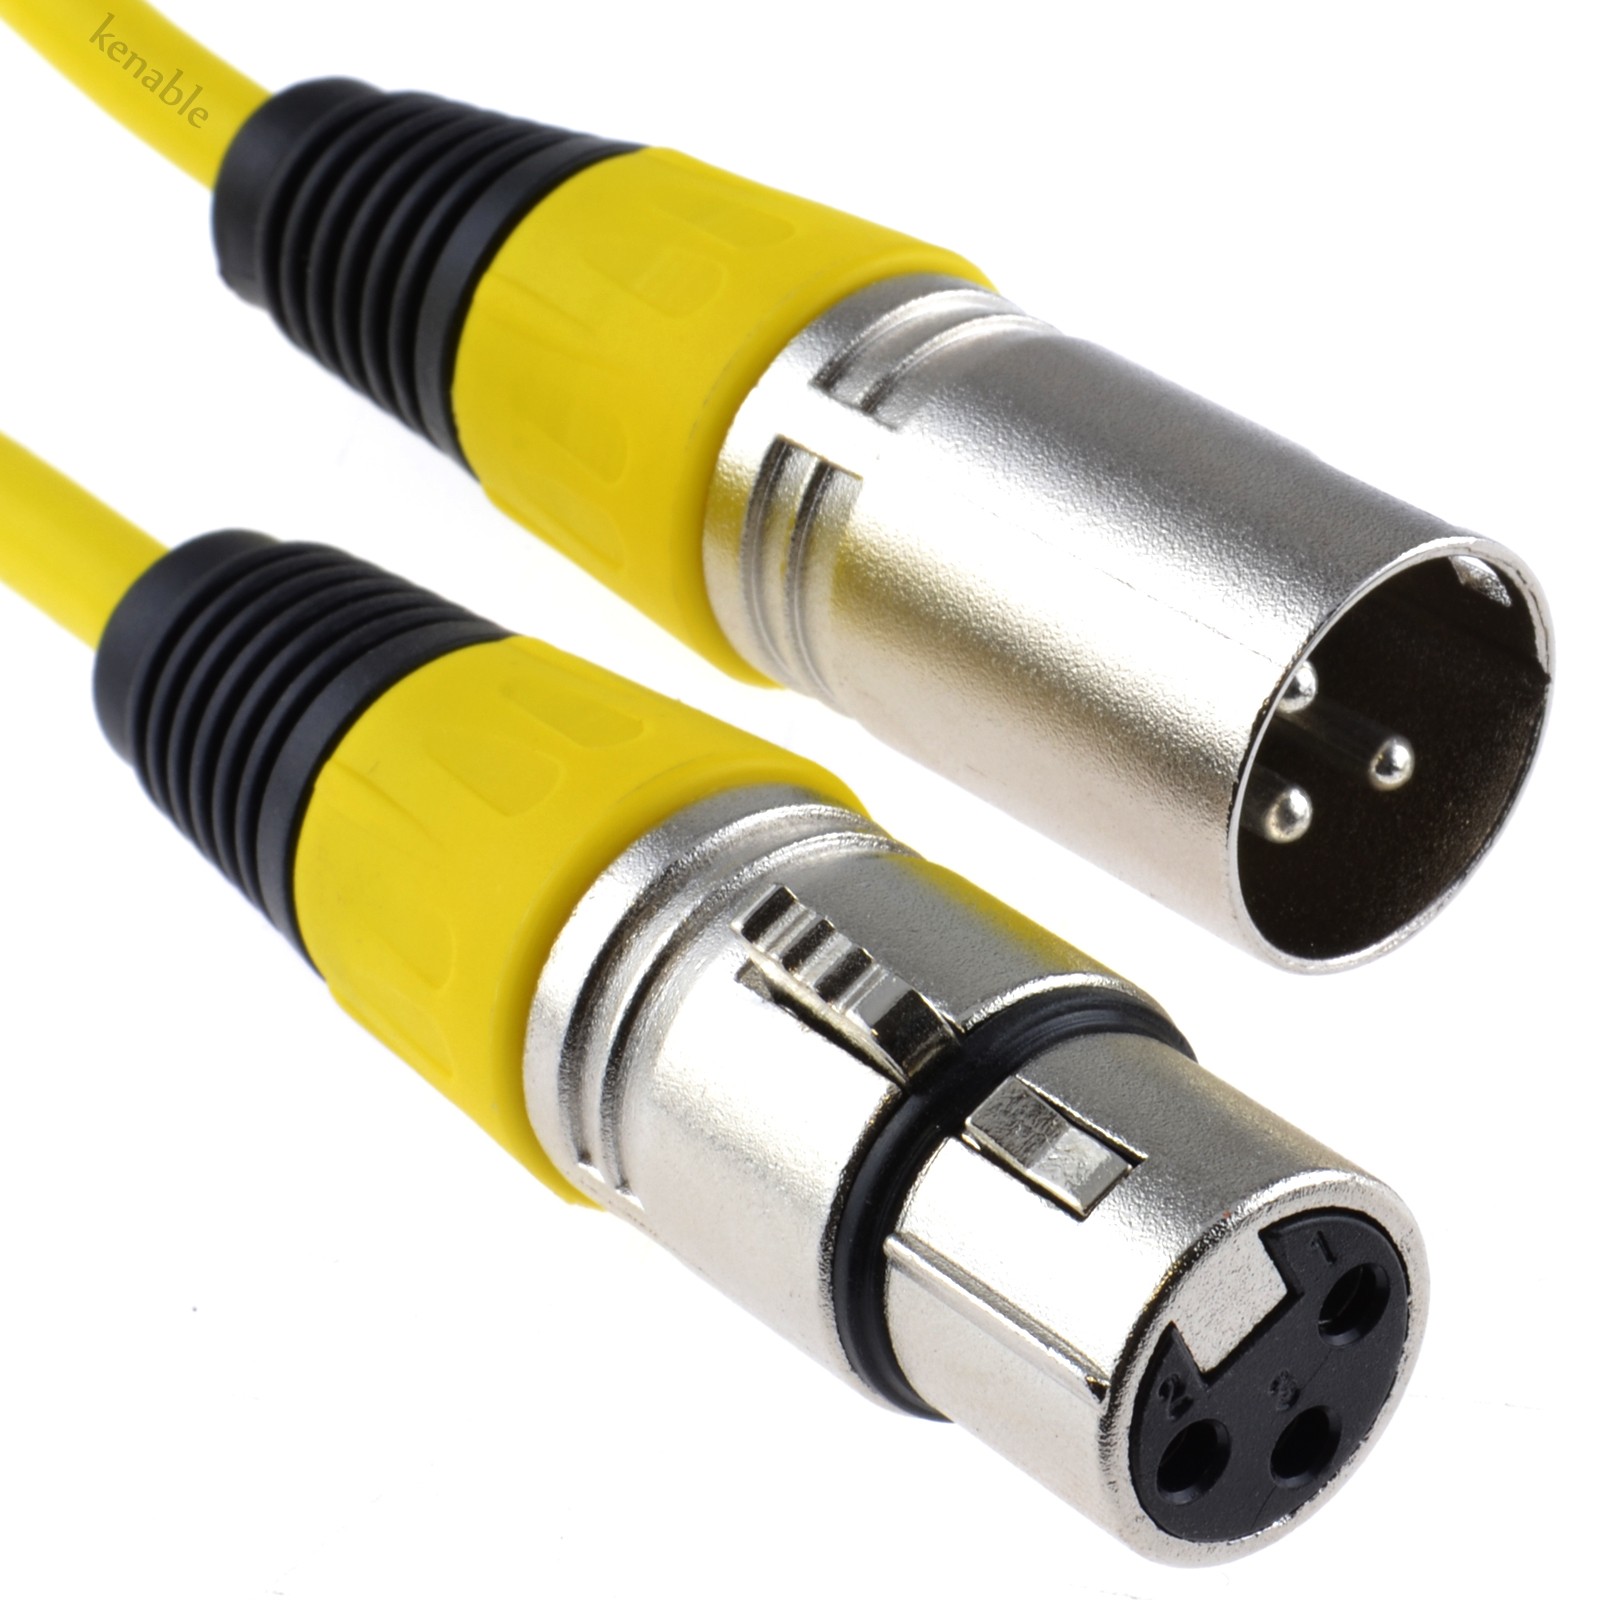 kenable XLR 3 Pin Microphone Lead Male to Female Audio Cable YELLOW 5m